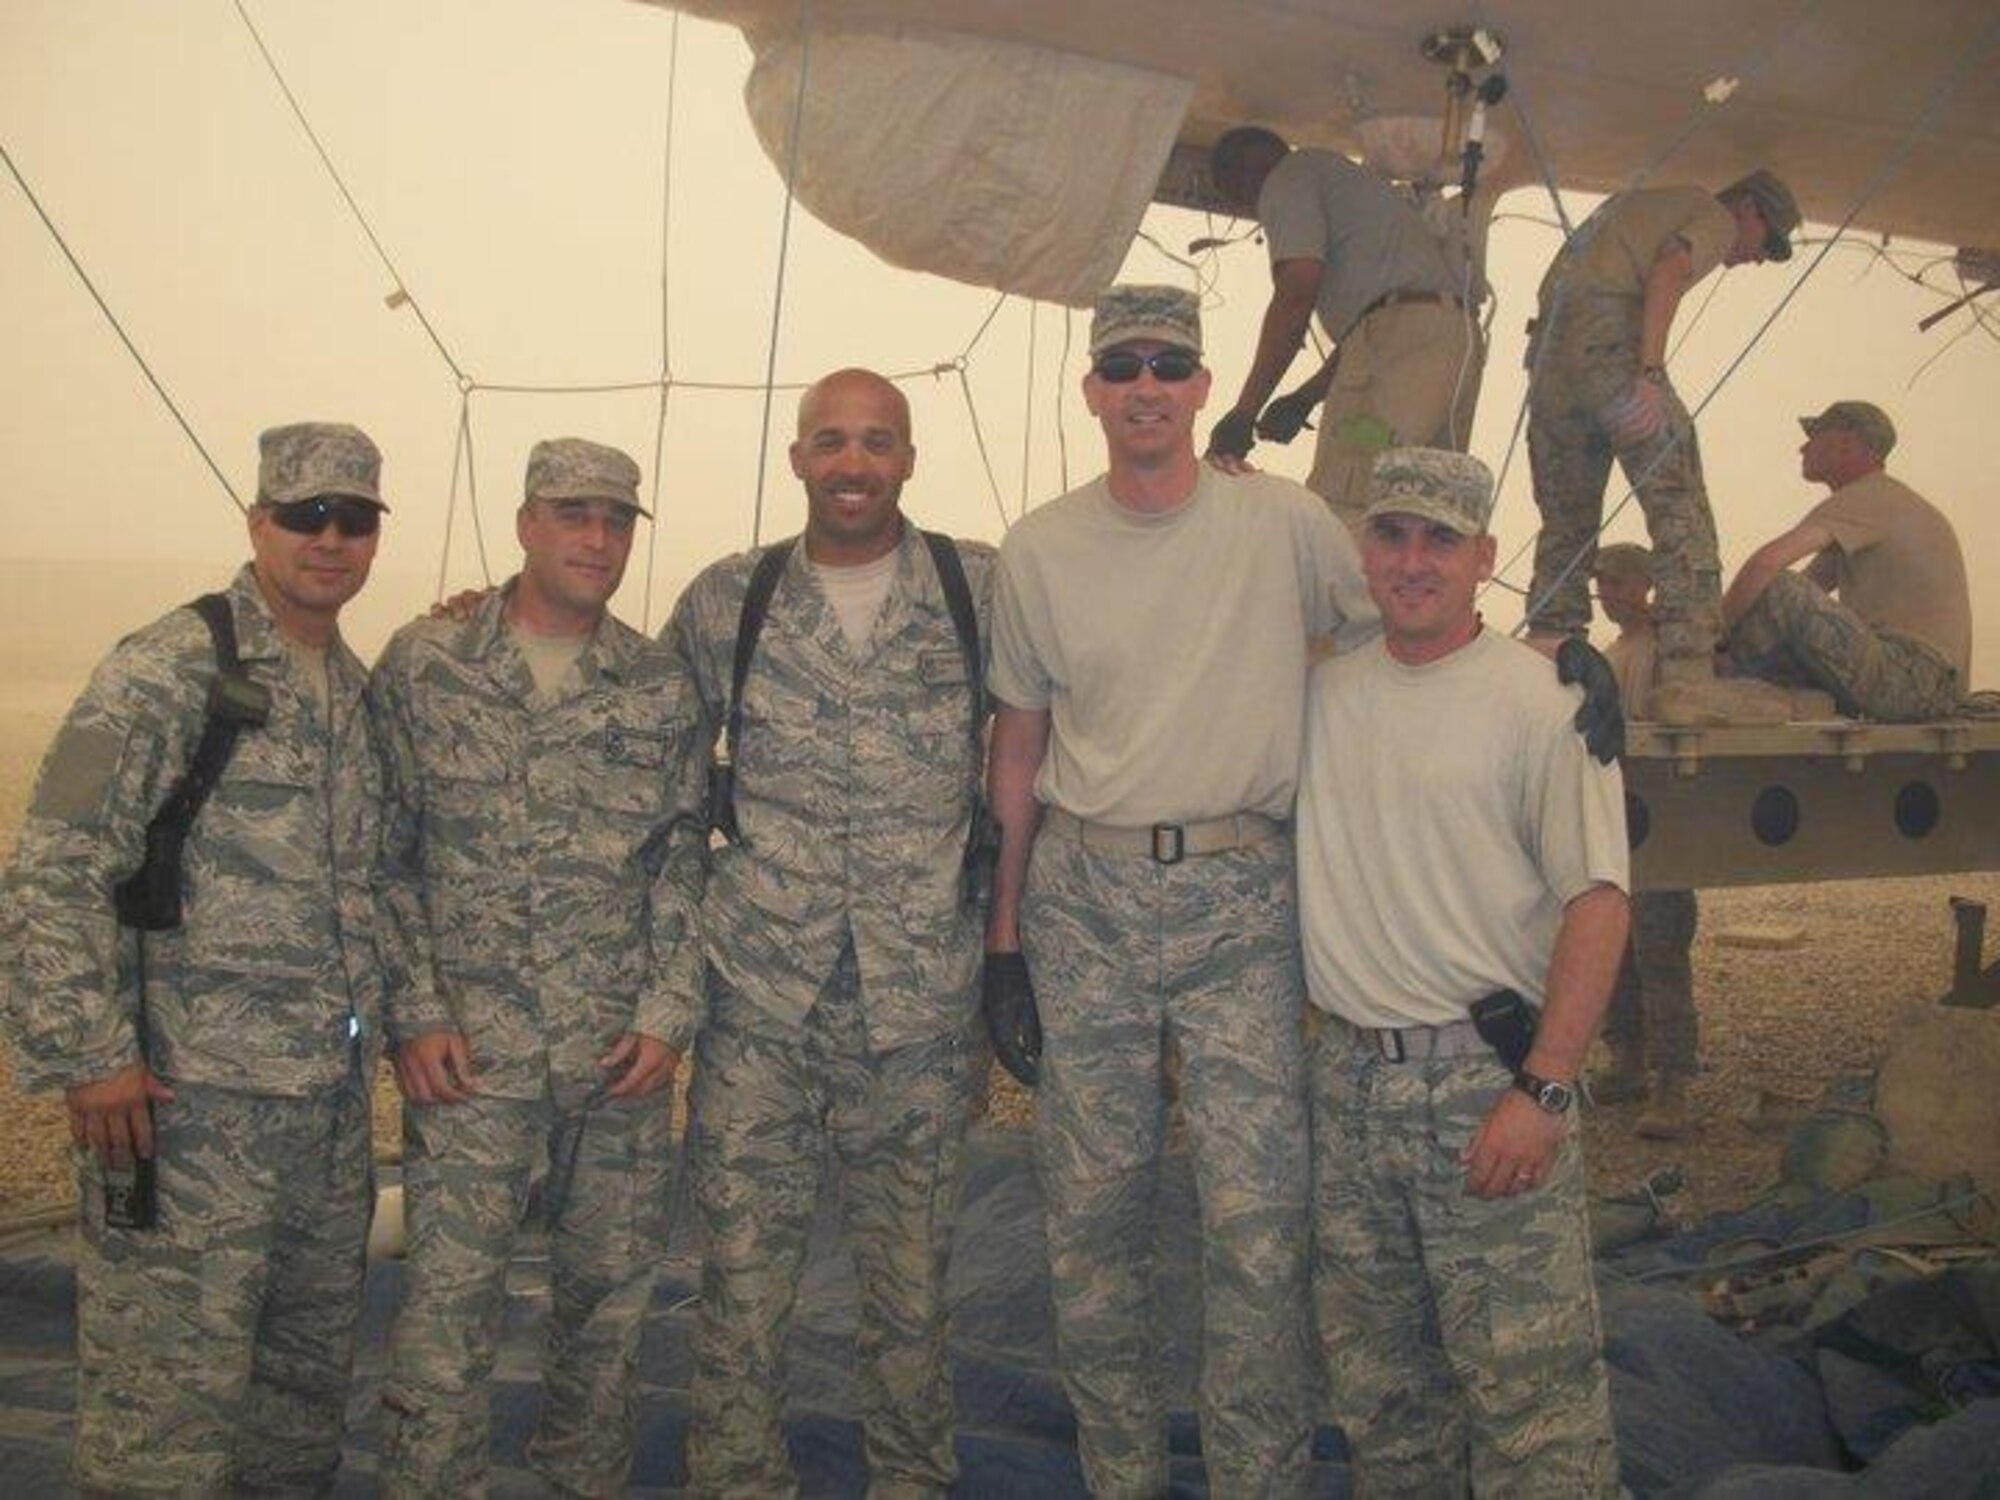 Tech. Sgt. Terrance Williams, center, currently 22nd Security Forces Squadron resources NCO in-charge, poses for a photo July 2011, in Balad, Iraq. Williams deployed nine times during his career, six of which were to combat locations. (Courtesy photo)